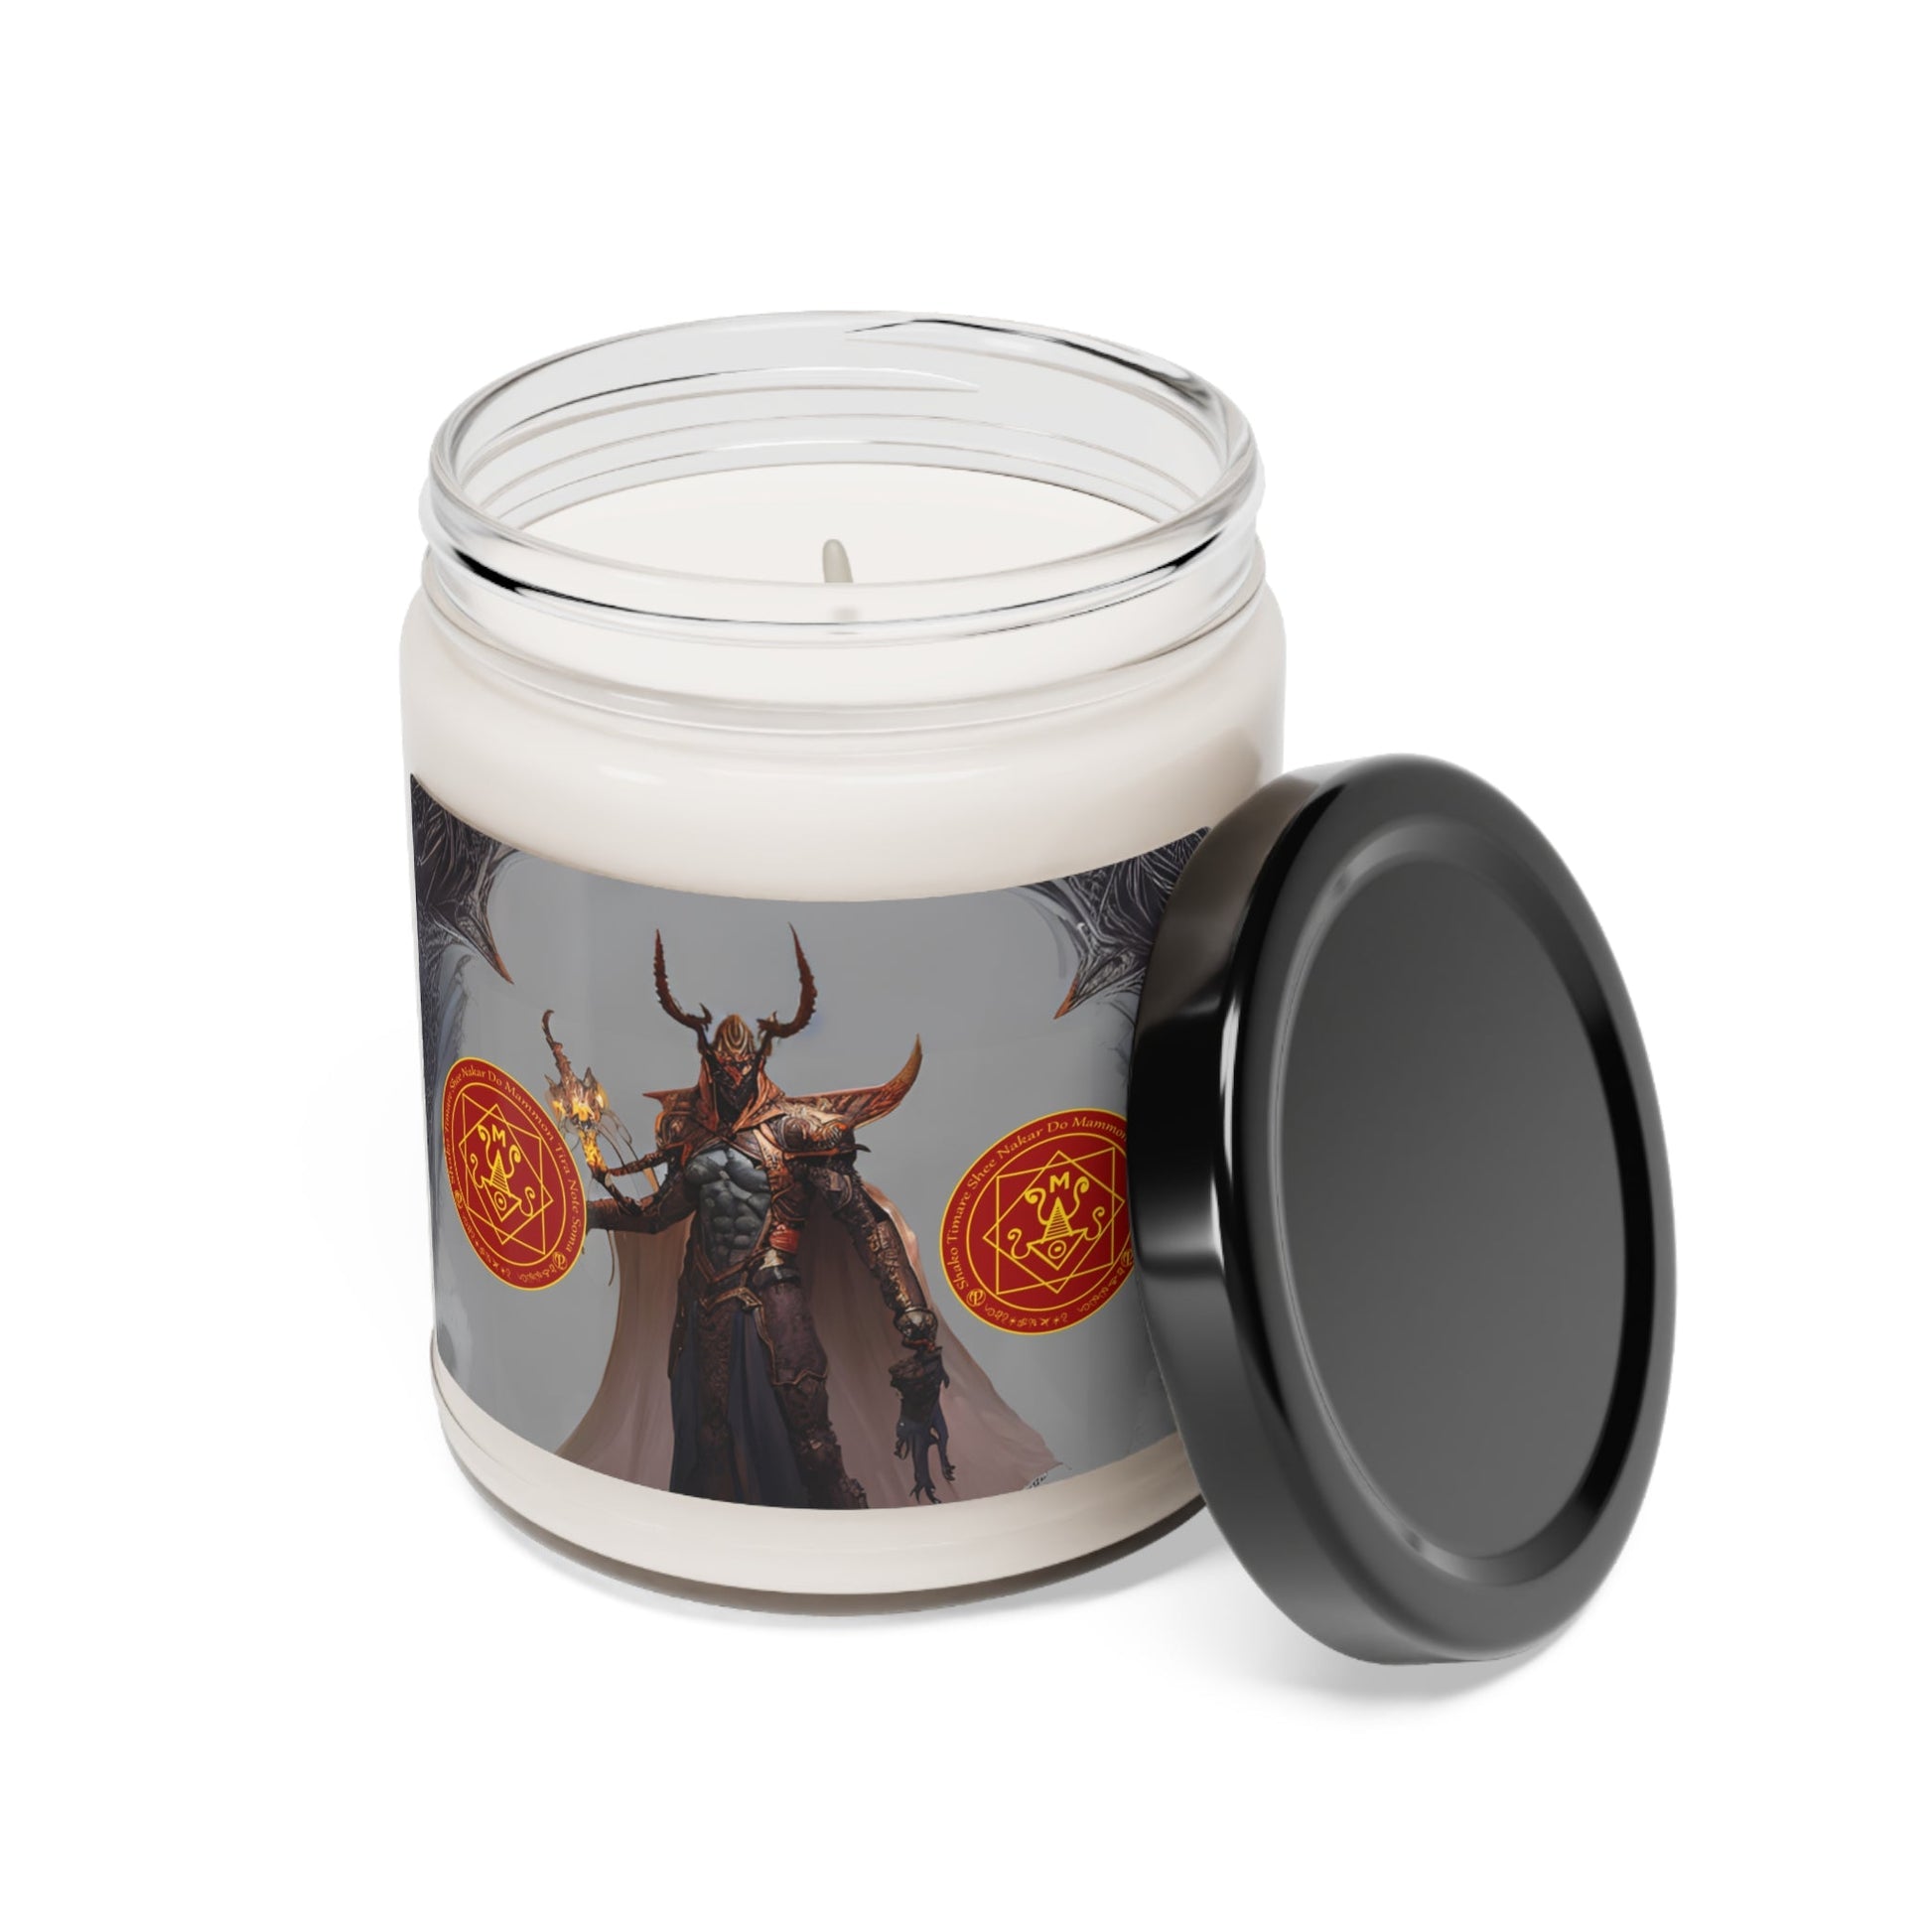 Demon-Mammon-Altar-Scented-Soy-Candle-for-Money-related-offerings-rituals-initiations-or-praying-and-meditation-12